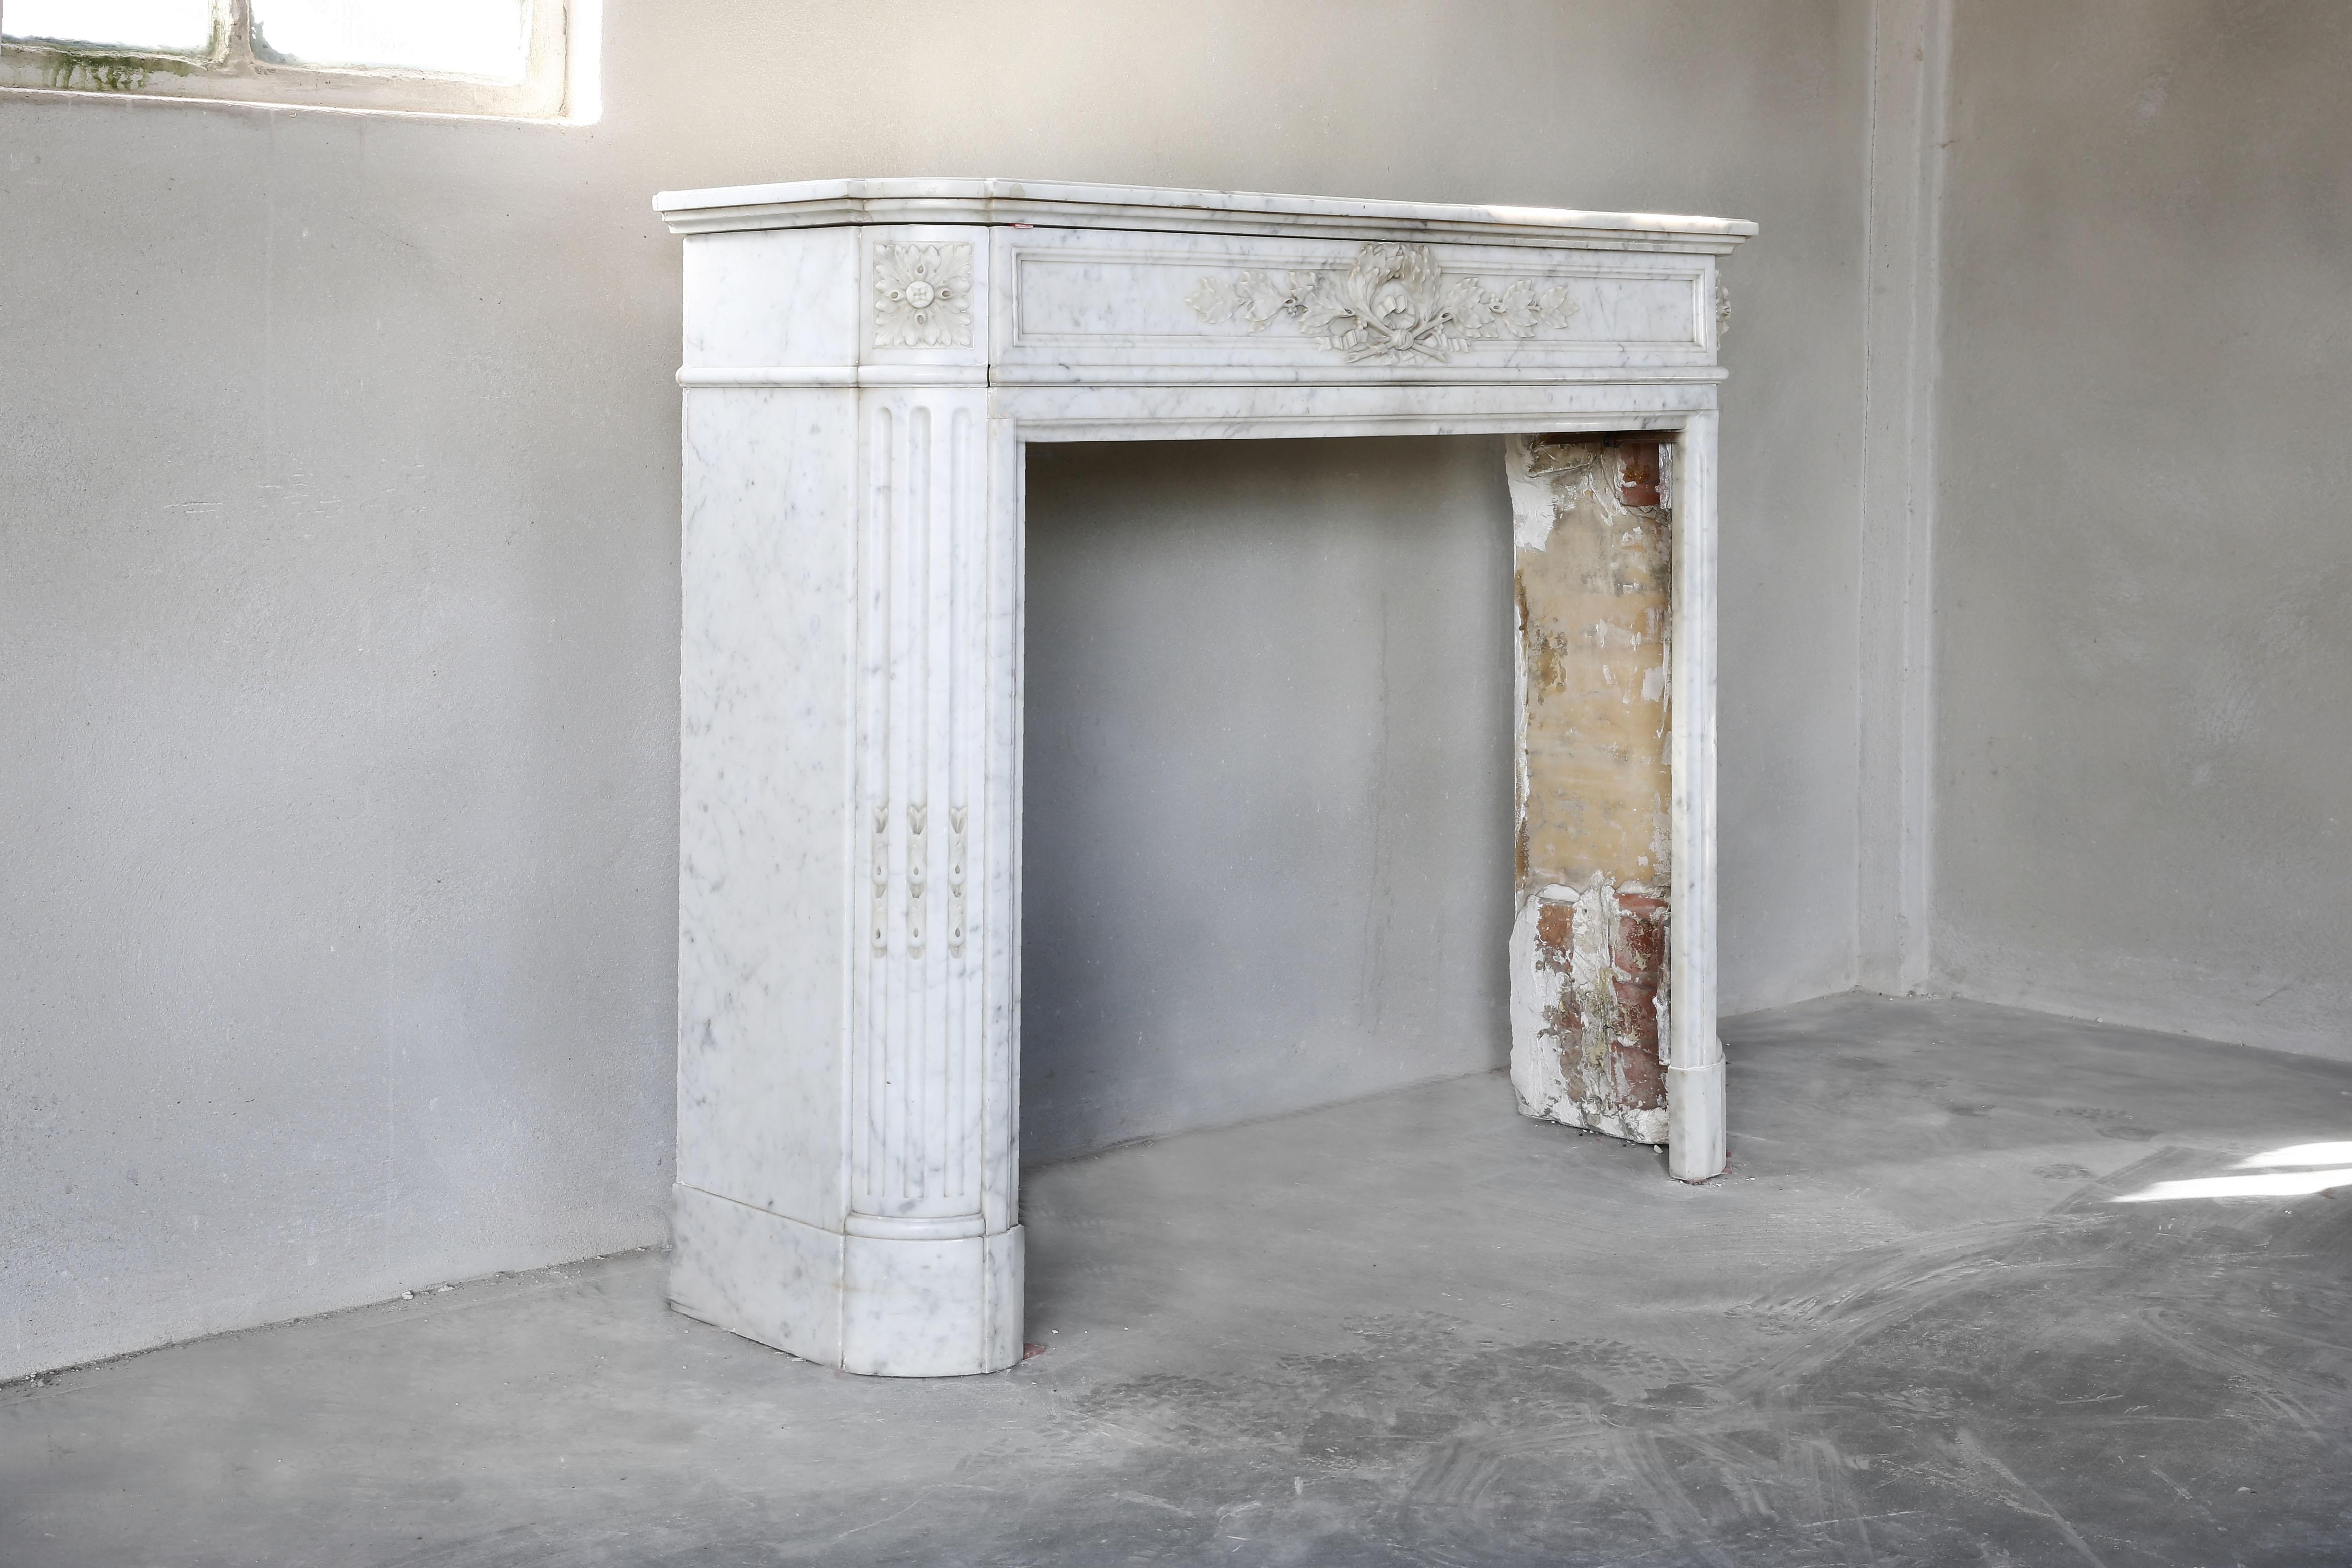 Beautiful compact antique marble fireplace from the marble Carrara from Italy. A mantelpiece from the 19th century in the style of Louis XVI. The mantelpiece has a Classic look and features a decorative ornament in the middle, flutes on the legs and